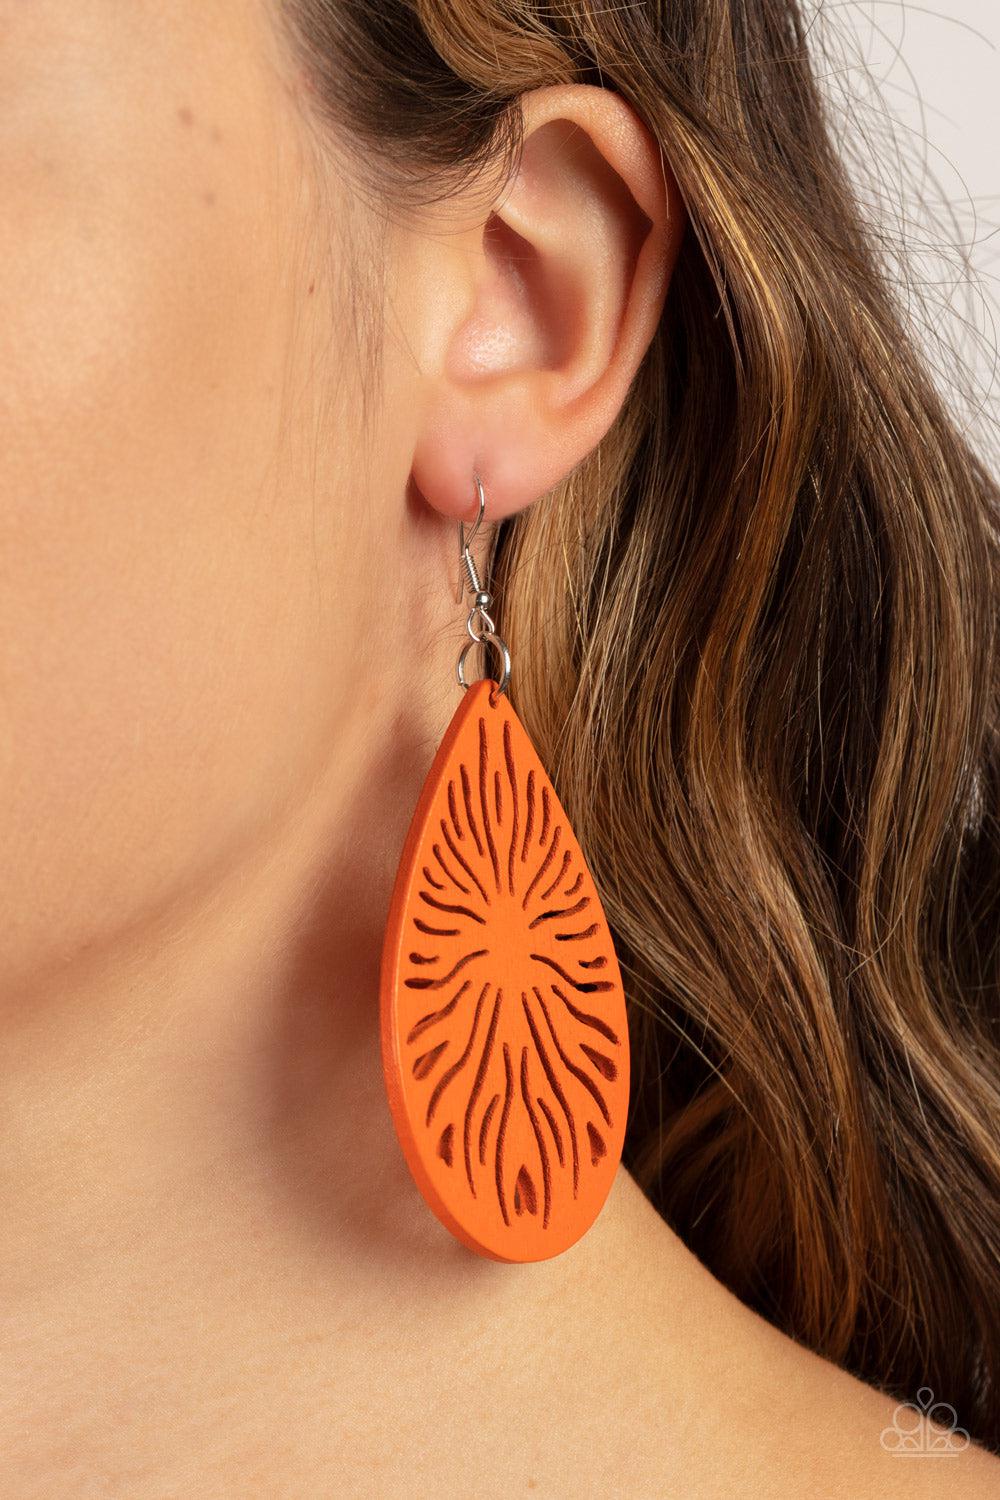 Sunny Incantations Orange Wood Earrings - Paparazzi Accessories-on model - CarasShop.com - $5 Jewelry by Cara Jewels